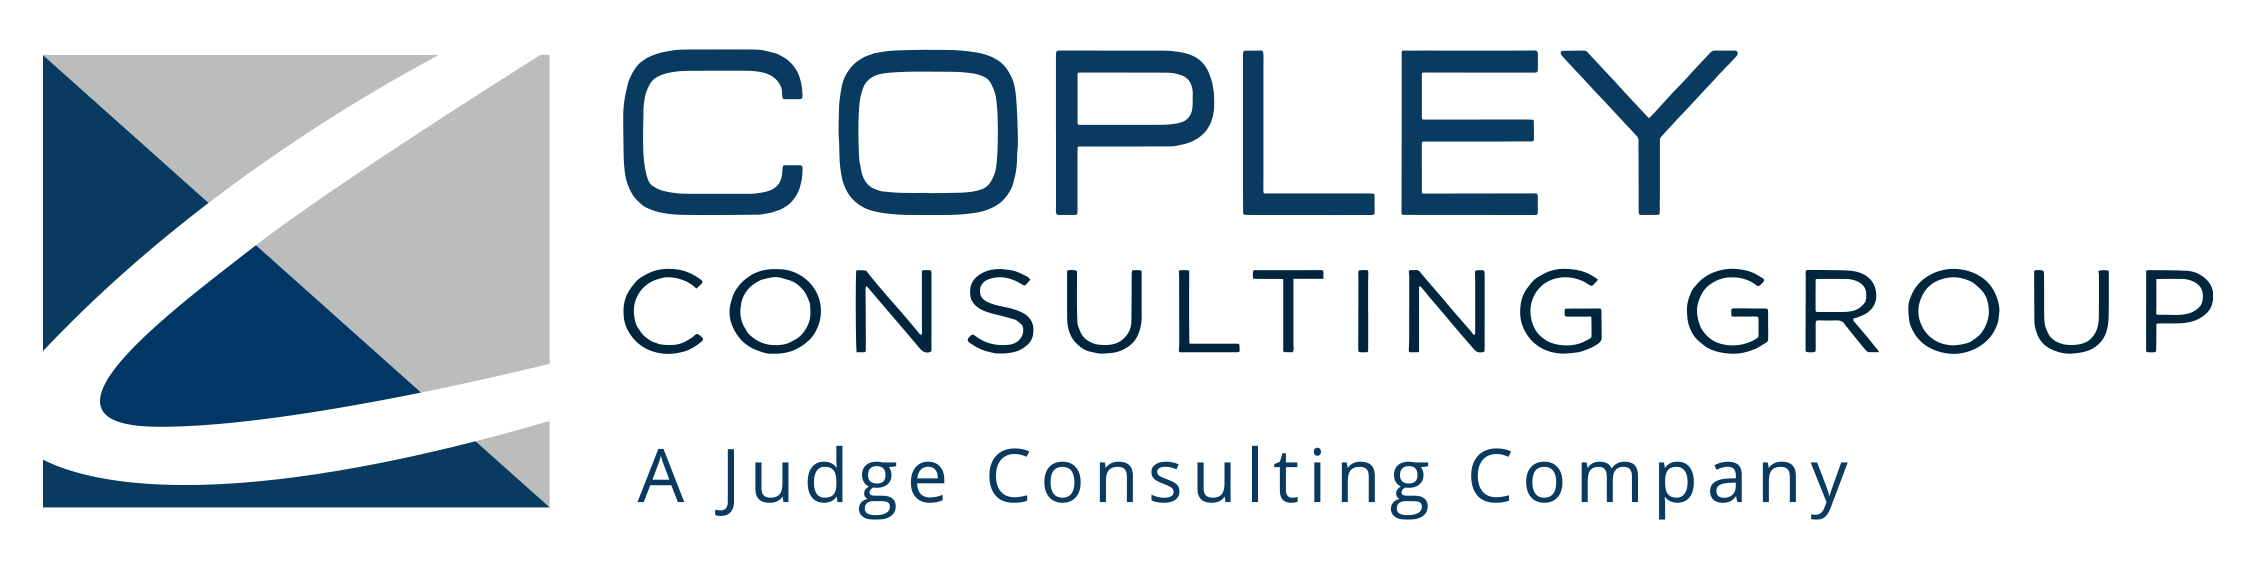 Copley Consulting Group